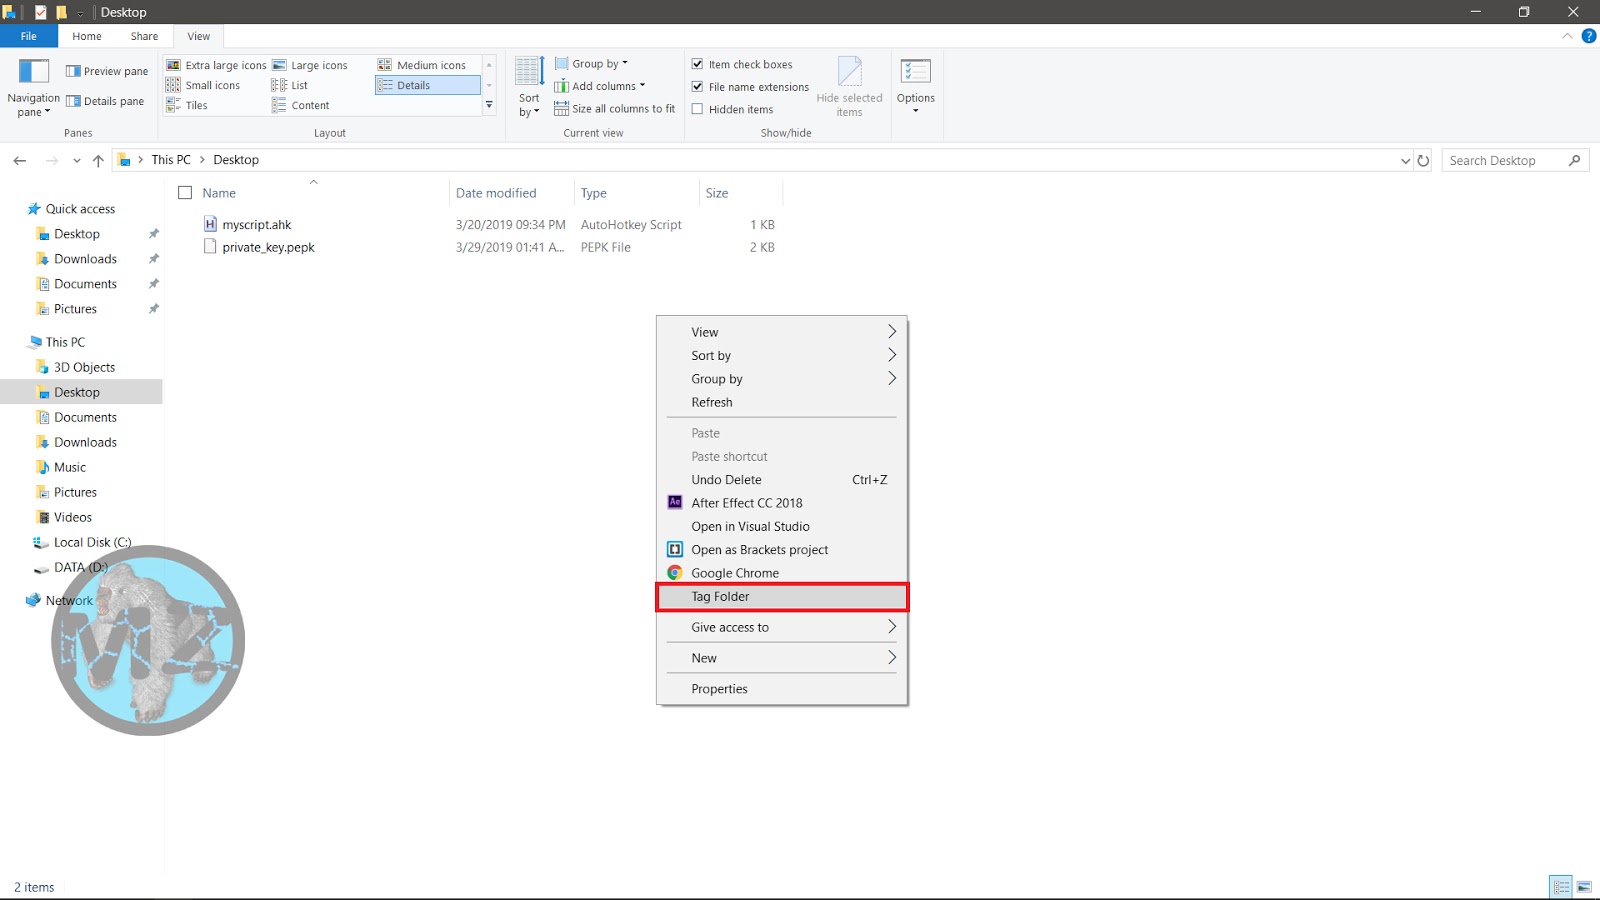 How to Tag Folders / Add Comment in Windows 10 - MZ.COM1600 x 900